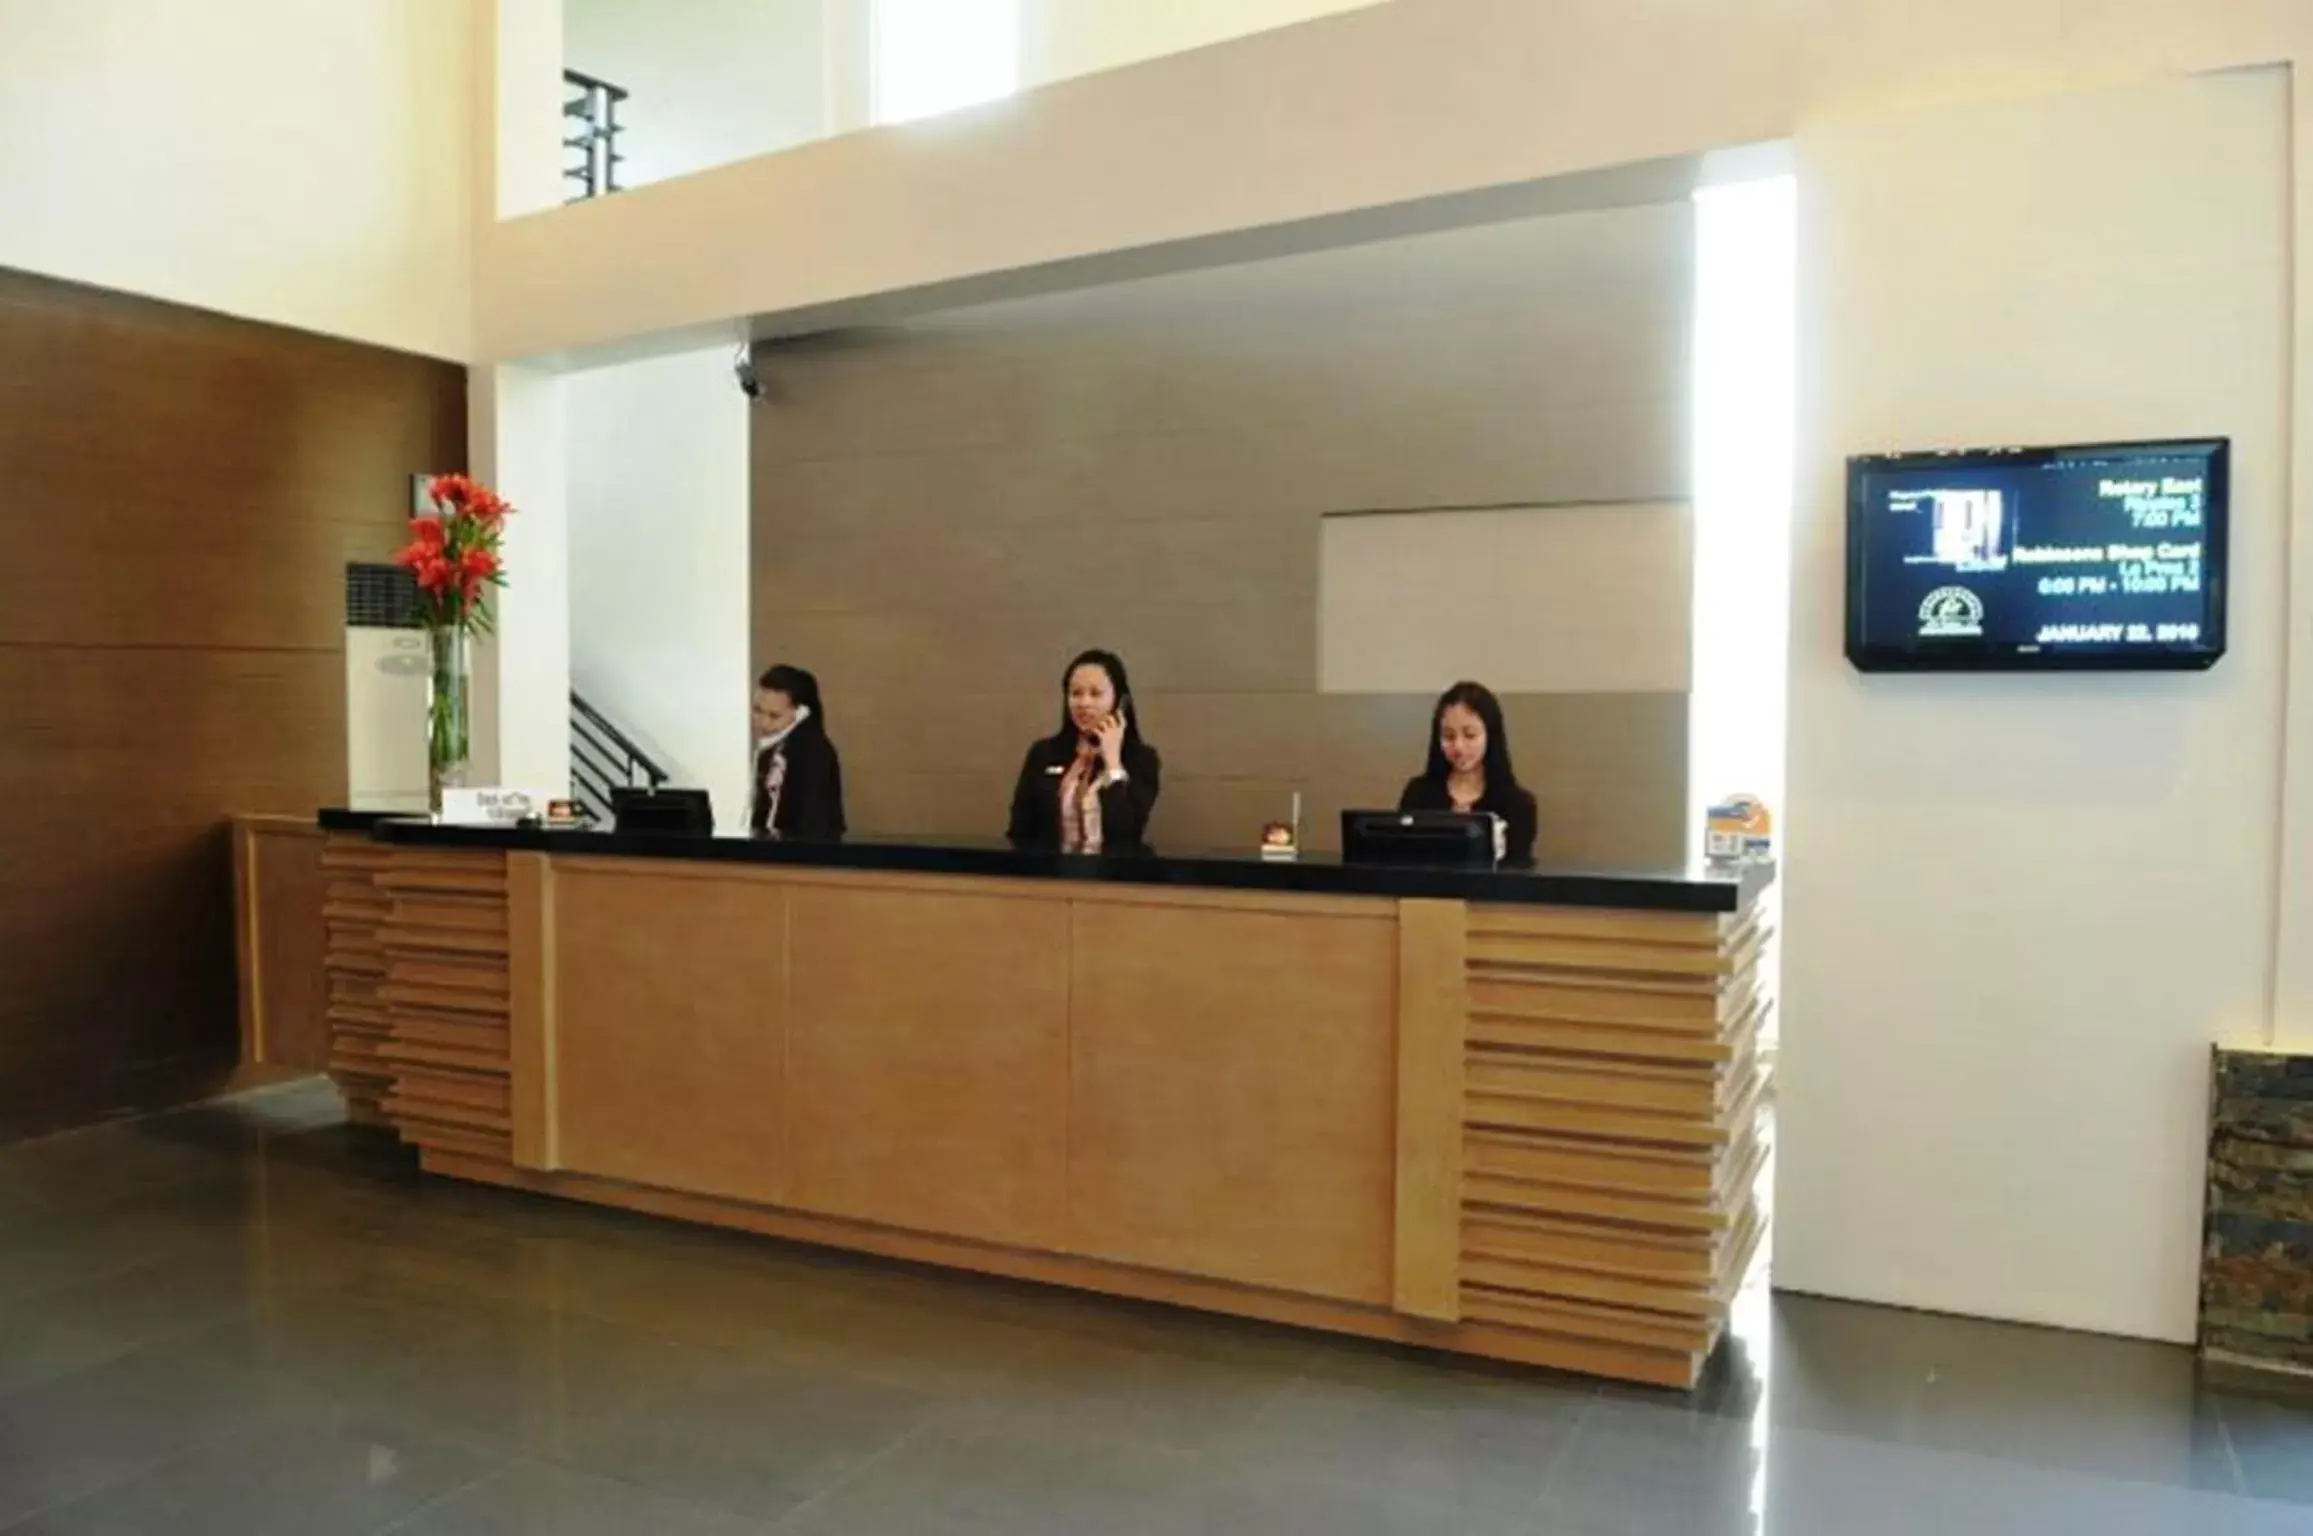 Staff, Lobby/Reception in L'Fisher Hotel Bacolod